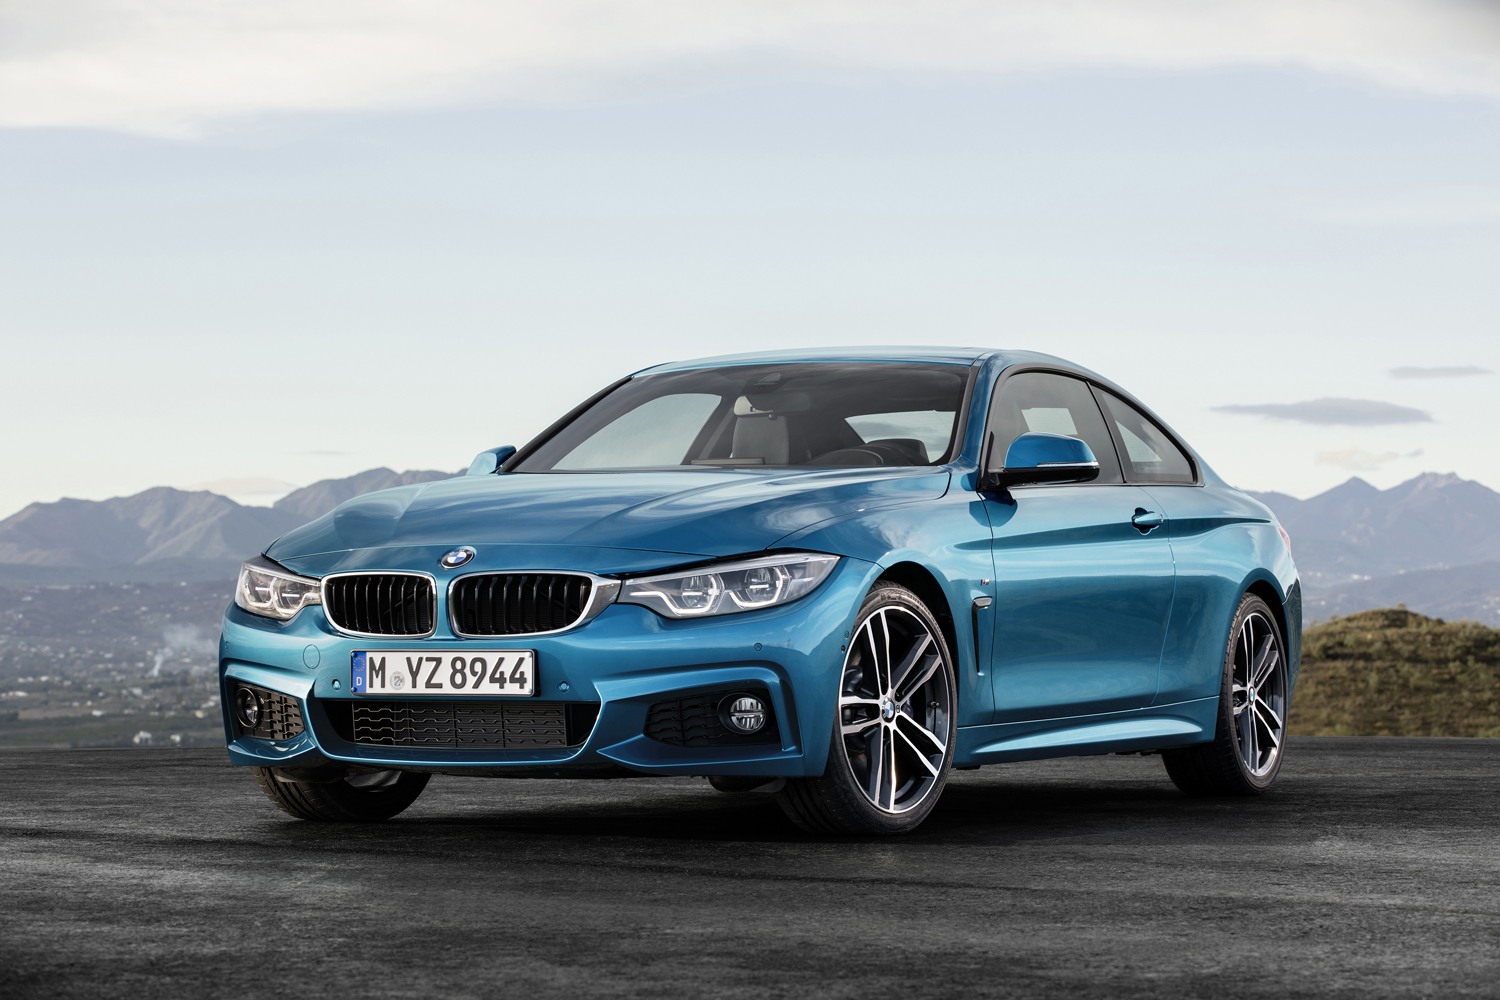 2018 BMW 4 Series | News, Specs, Pictures, Performance | Digital Trends